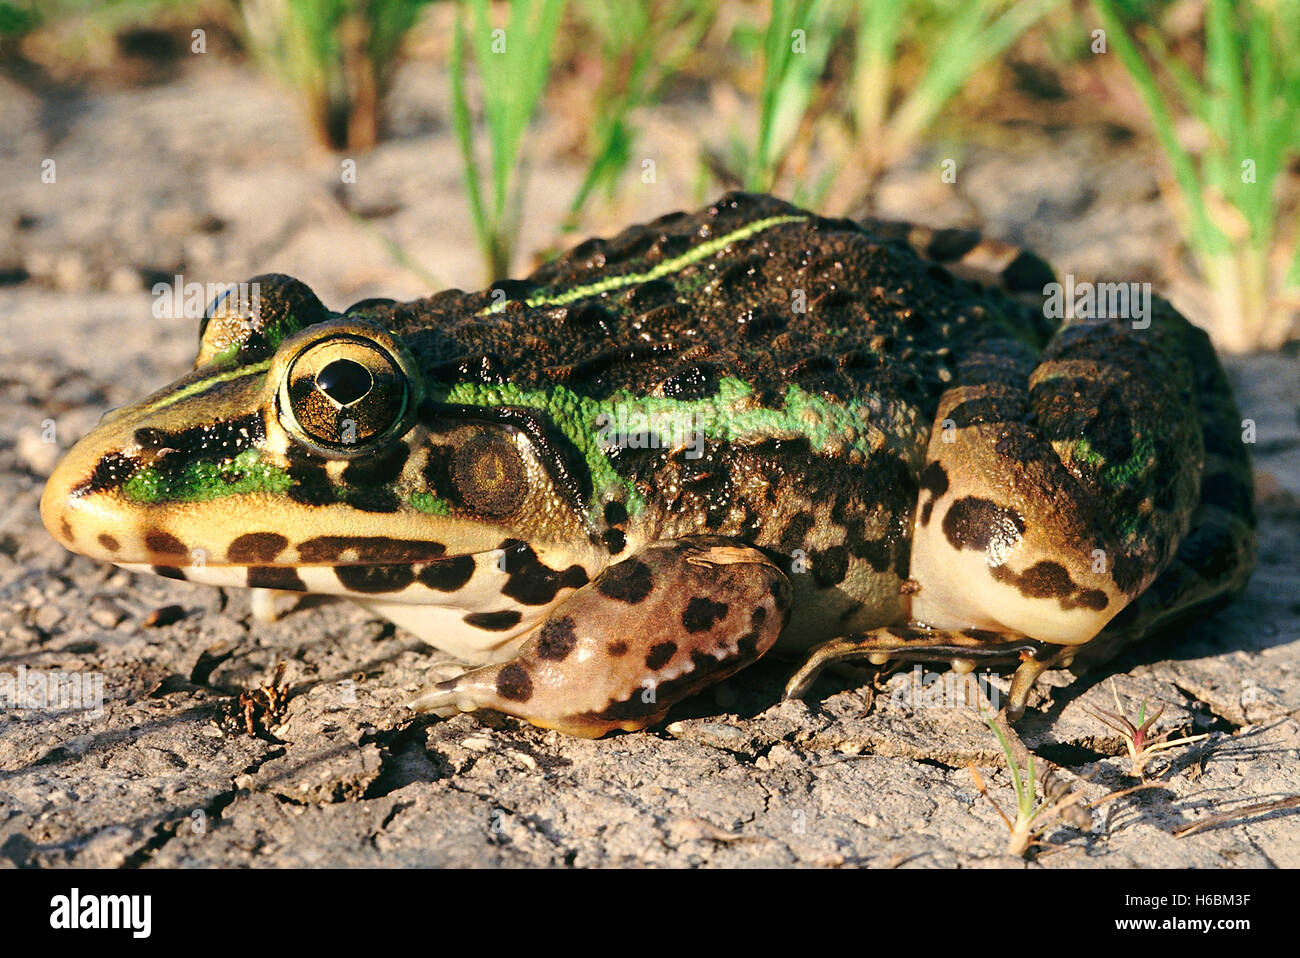 Hoplobatrachus Tigerinus. Indian bull frog. A large frog commonly found in paddy fields and near ponds. Stock Photo